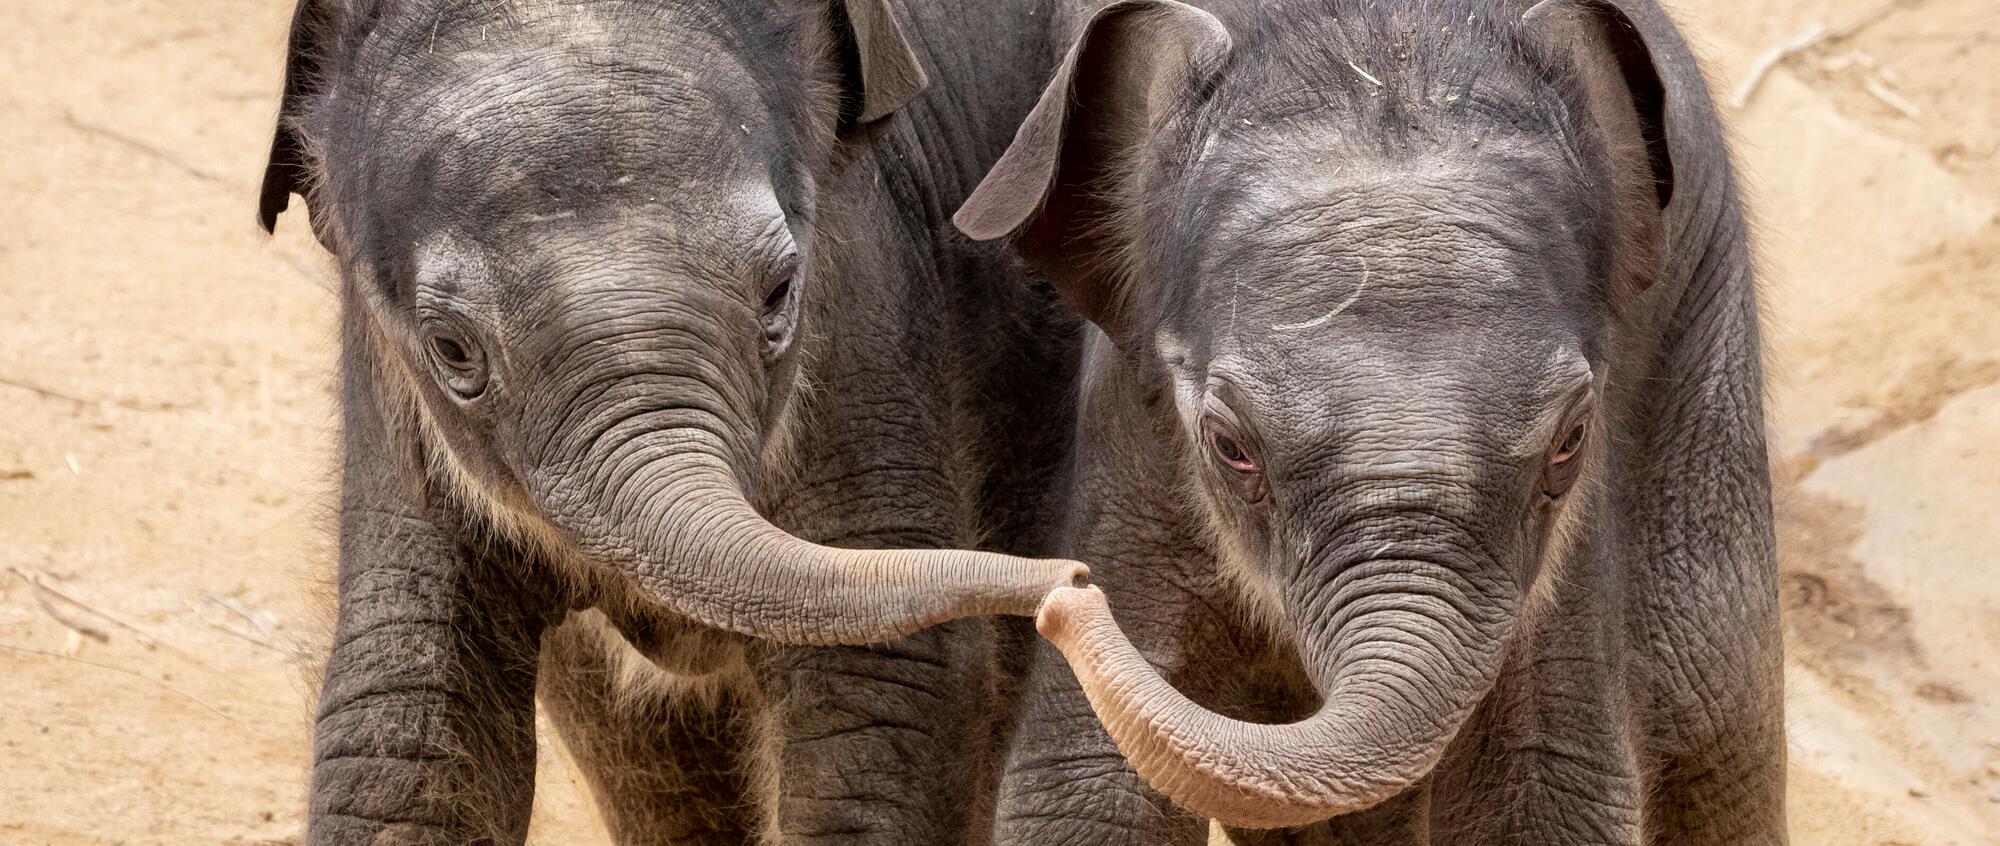 Two Asian Elephant calves, touching trunks while looking toward the camera.